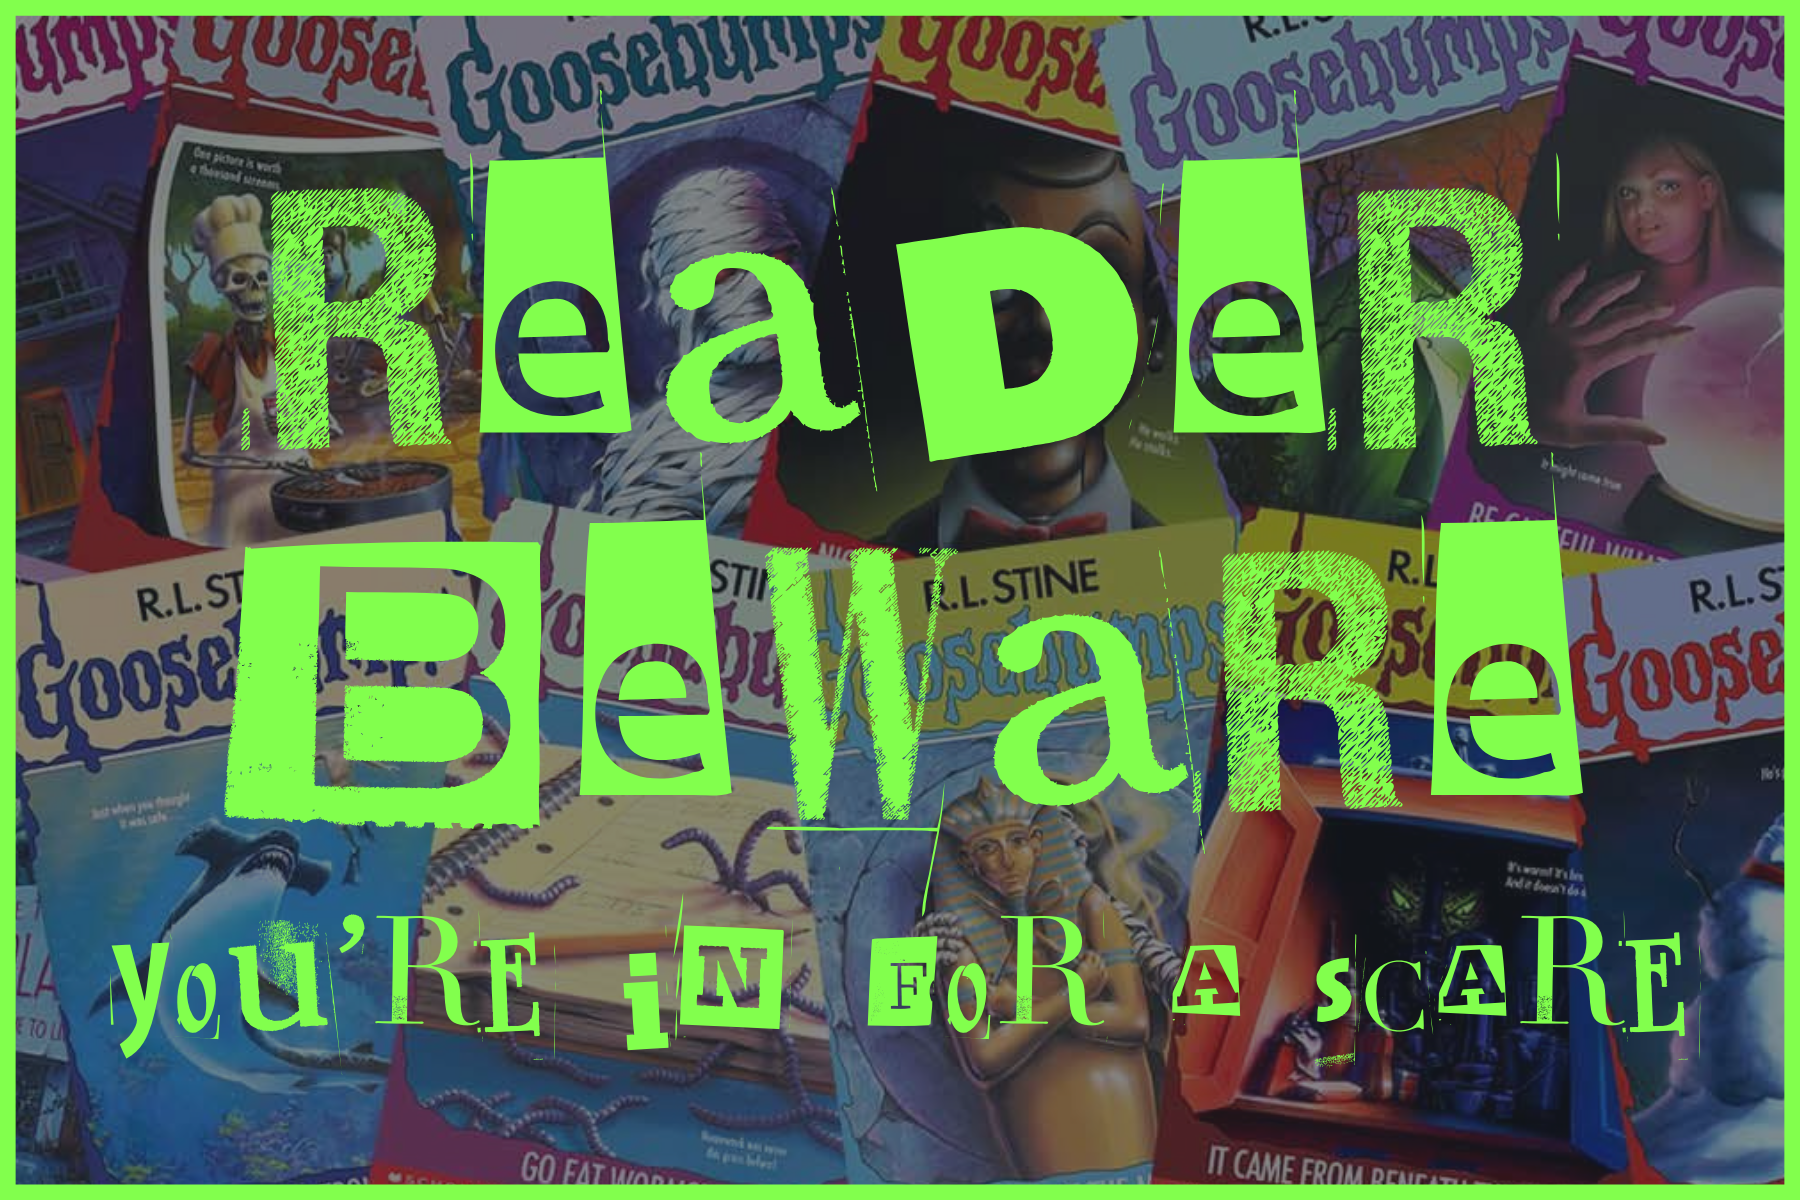 Goosebumps Quiz: How Much Do You Know About the Book & Show?